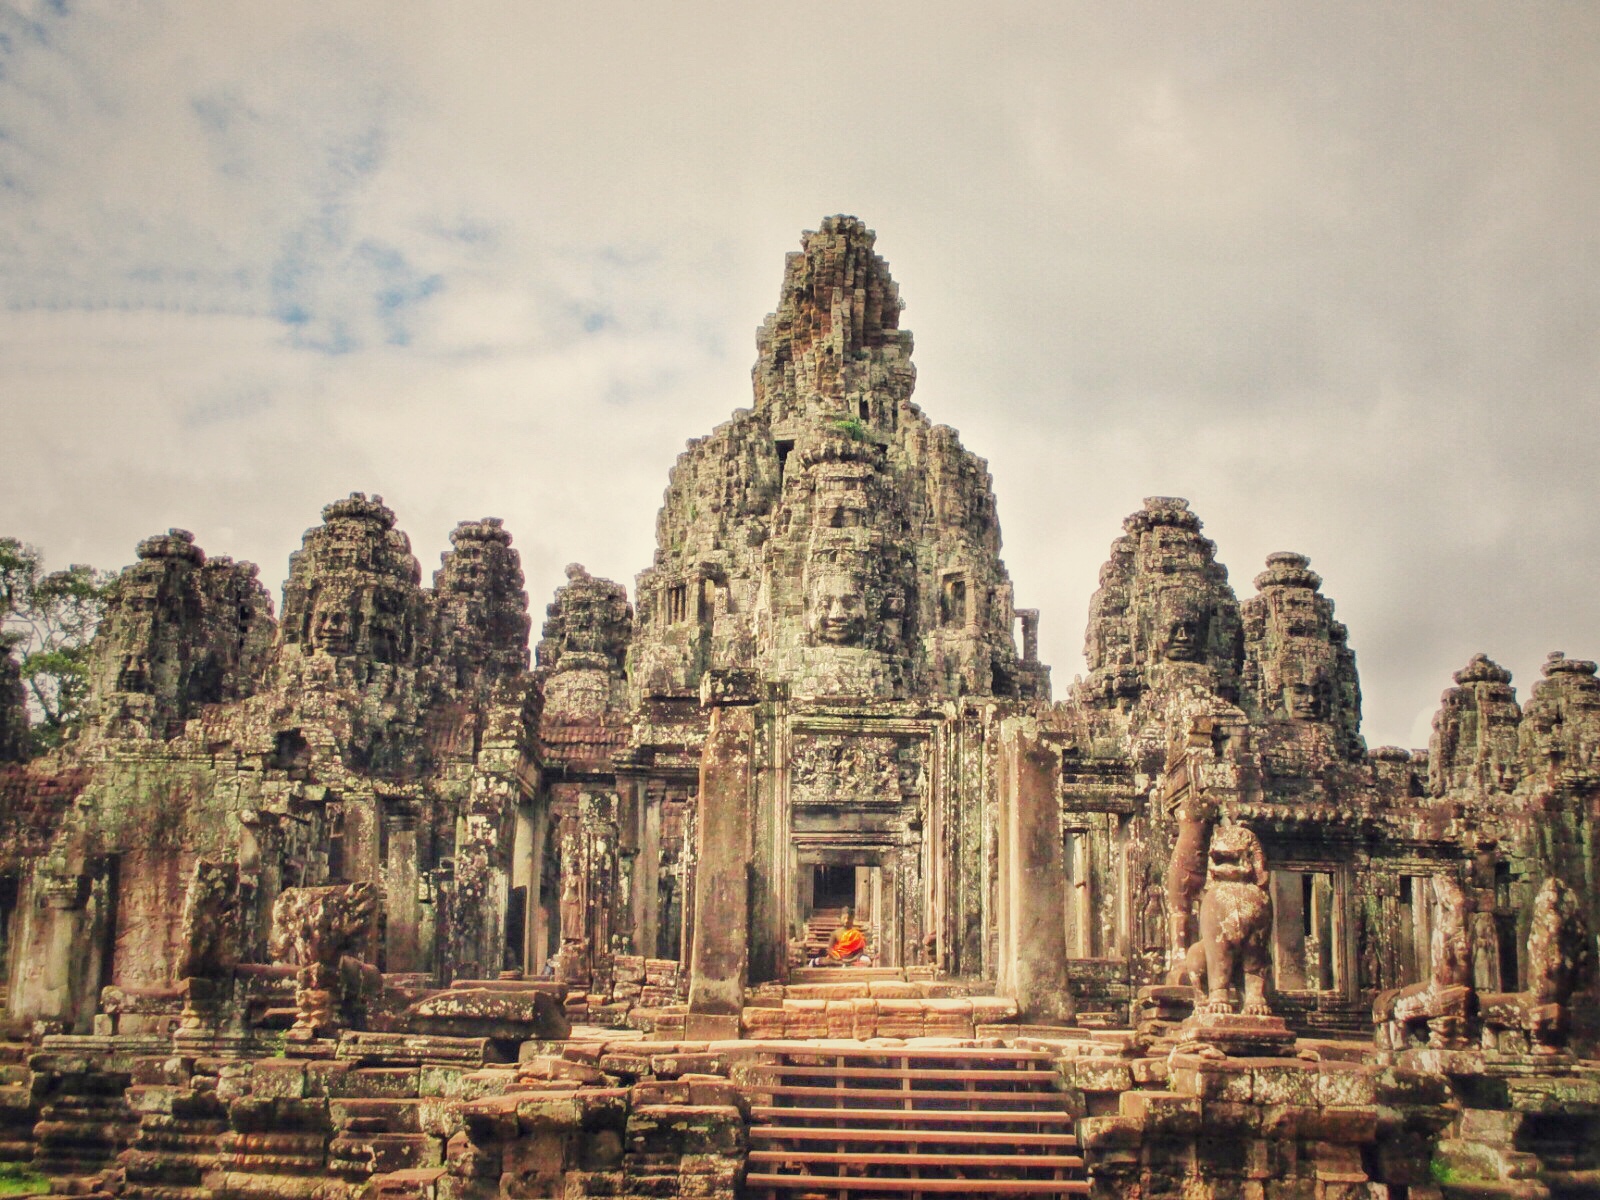 The Bayon Temple with the enormous smiling face stone towers in Angkor Wat complex